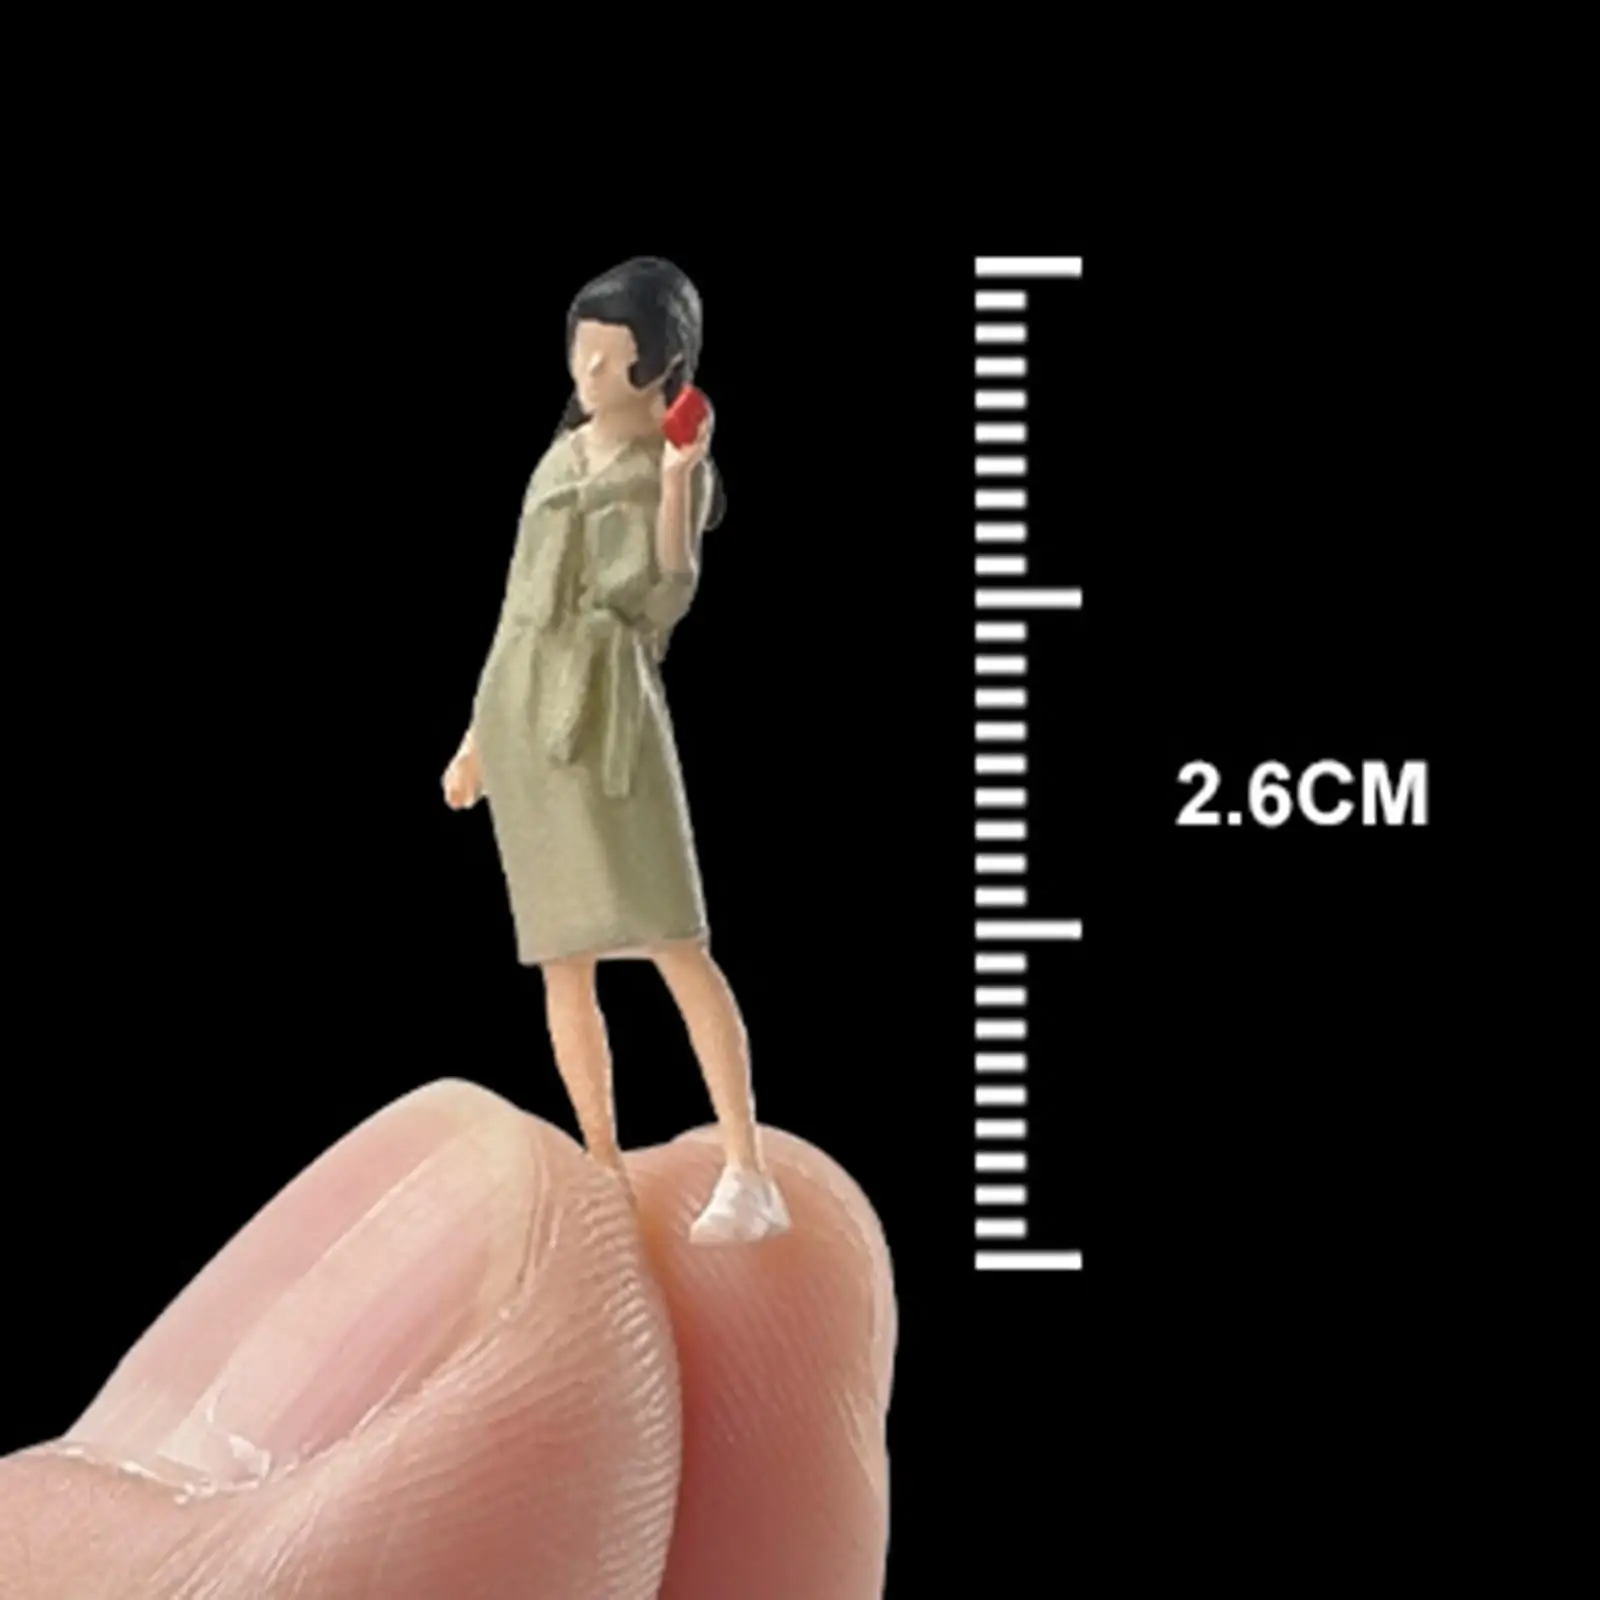 Character Model Tiny Resin Realistic Girl People Figurine for Sand Table Desktop Decoration Train Station Layout Fairy Garden